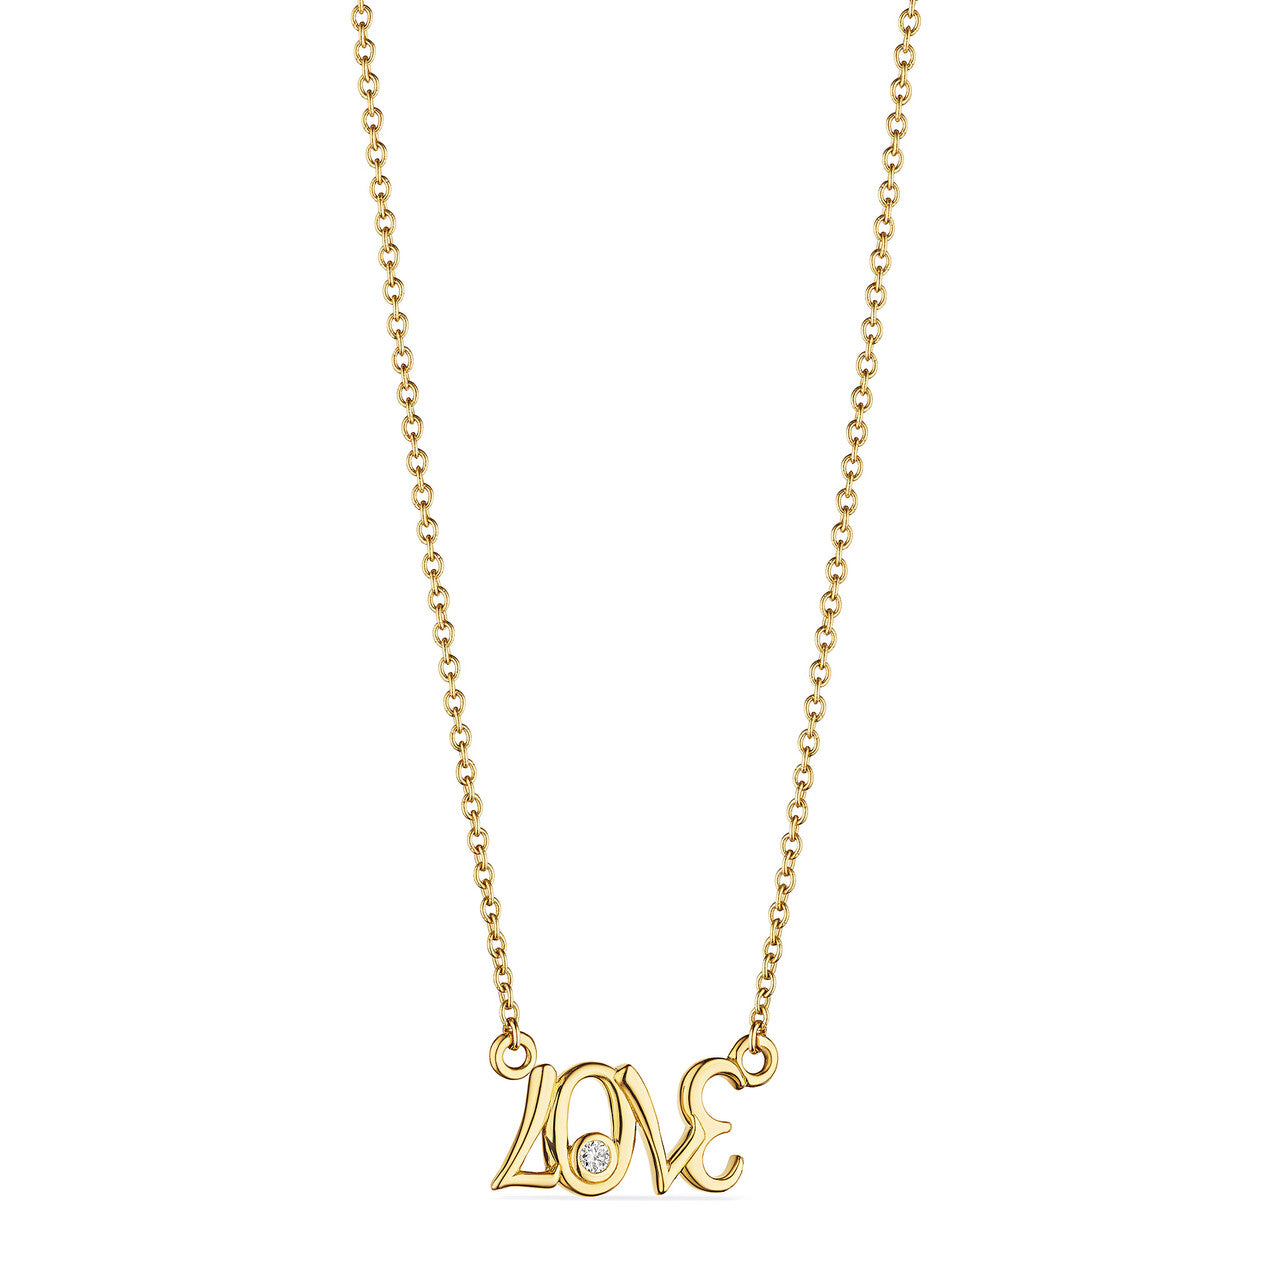 Eros LOVE Necklace with Diamonds in 18K